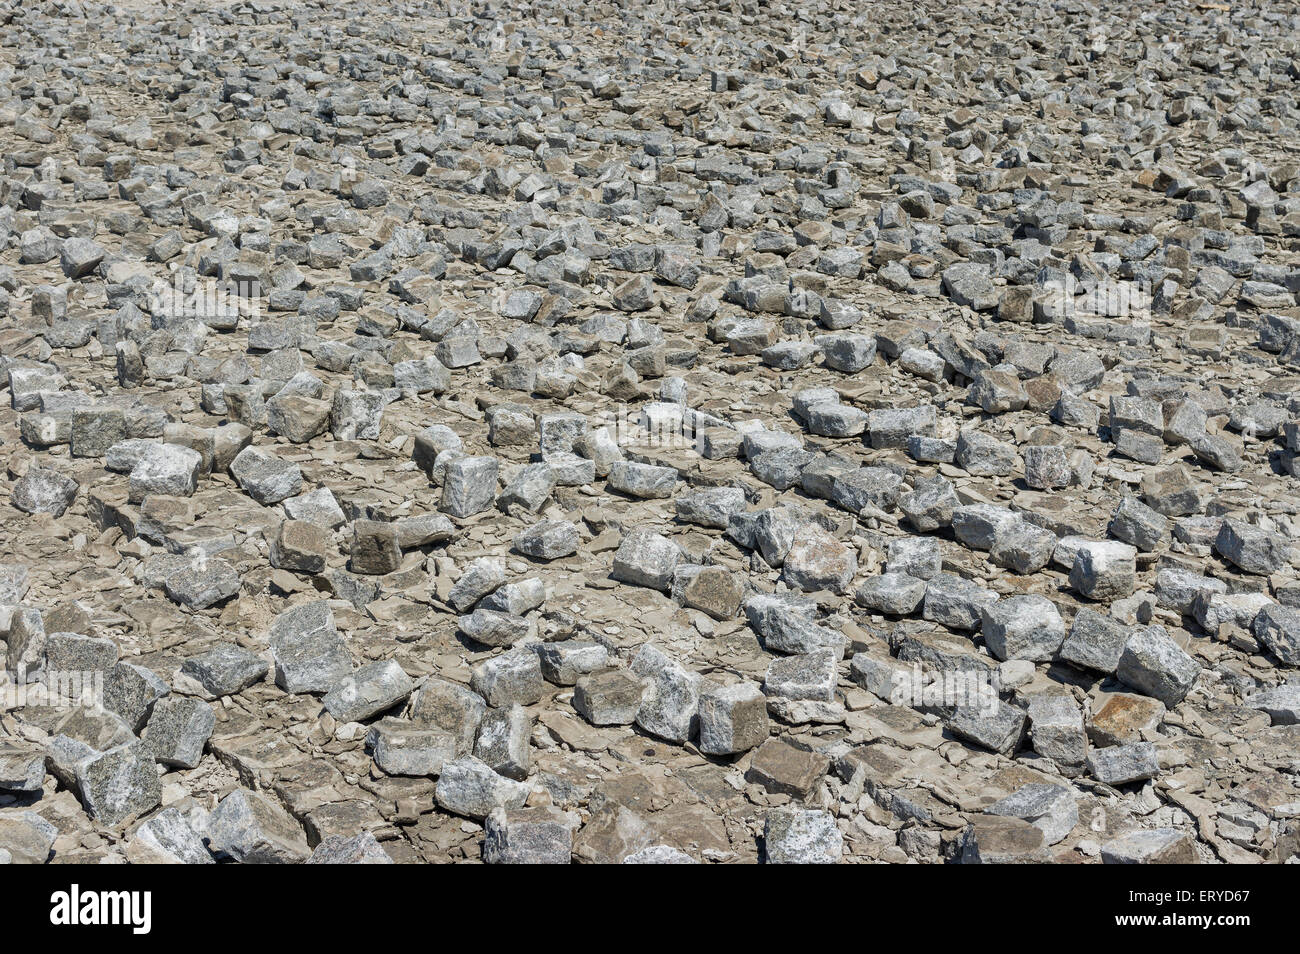 Industrial background - dismantled cobblestone pavement Stock Photo